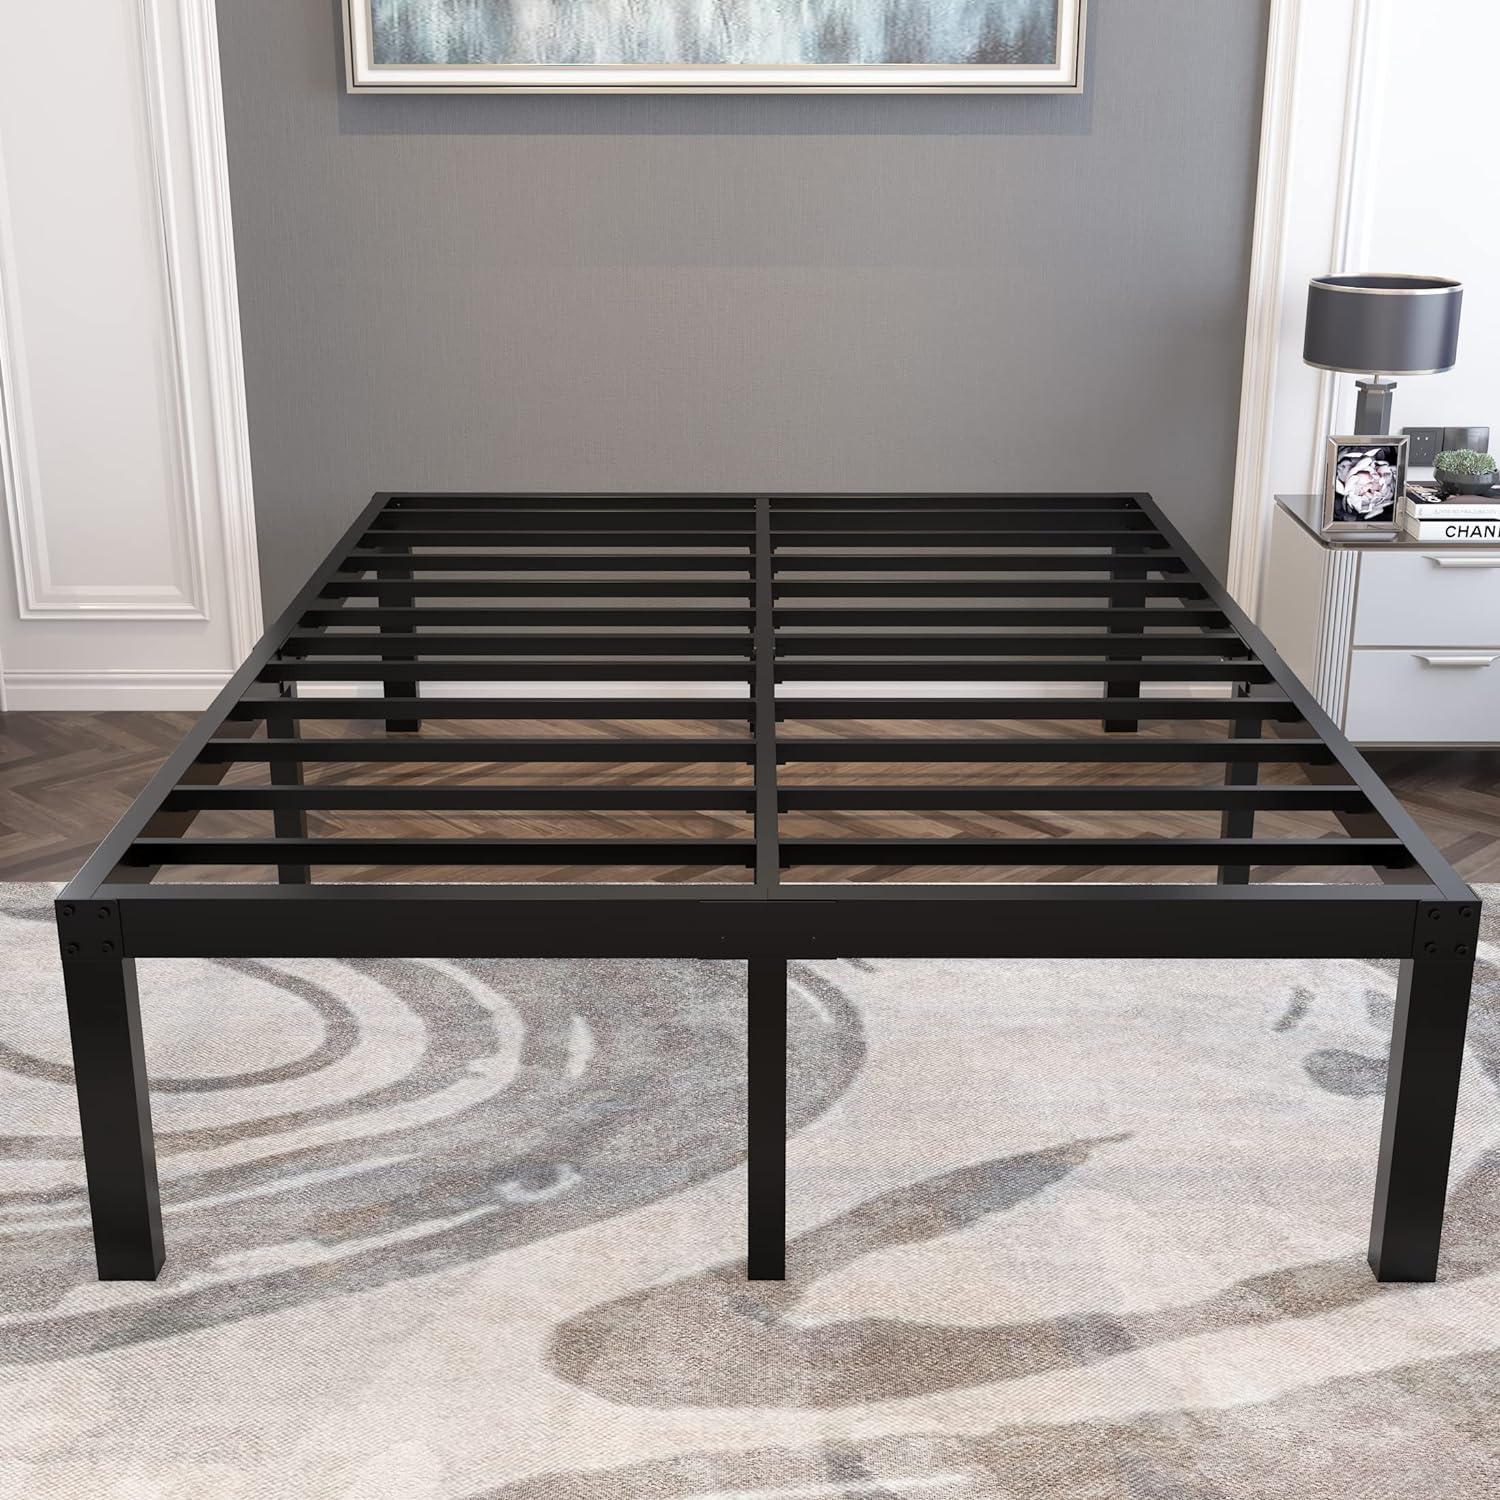 yookare 18 Inch Tall and Strong Platform Metal Bed Frame4000lbs Heavy Duty Frame - $90